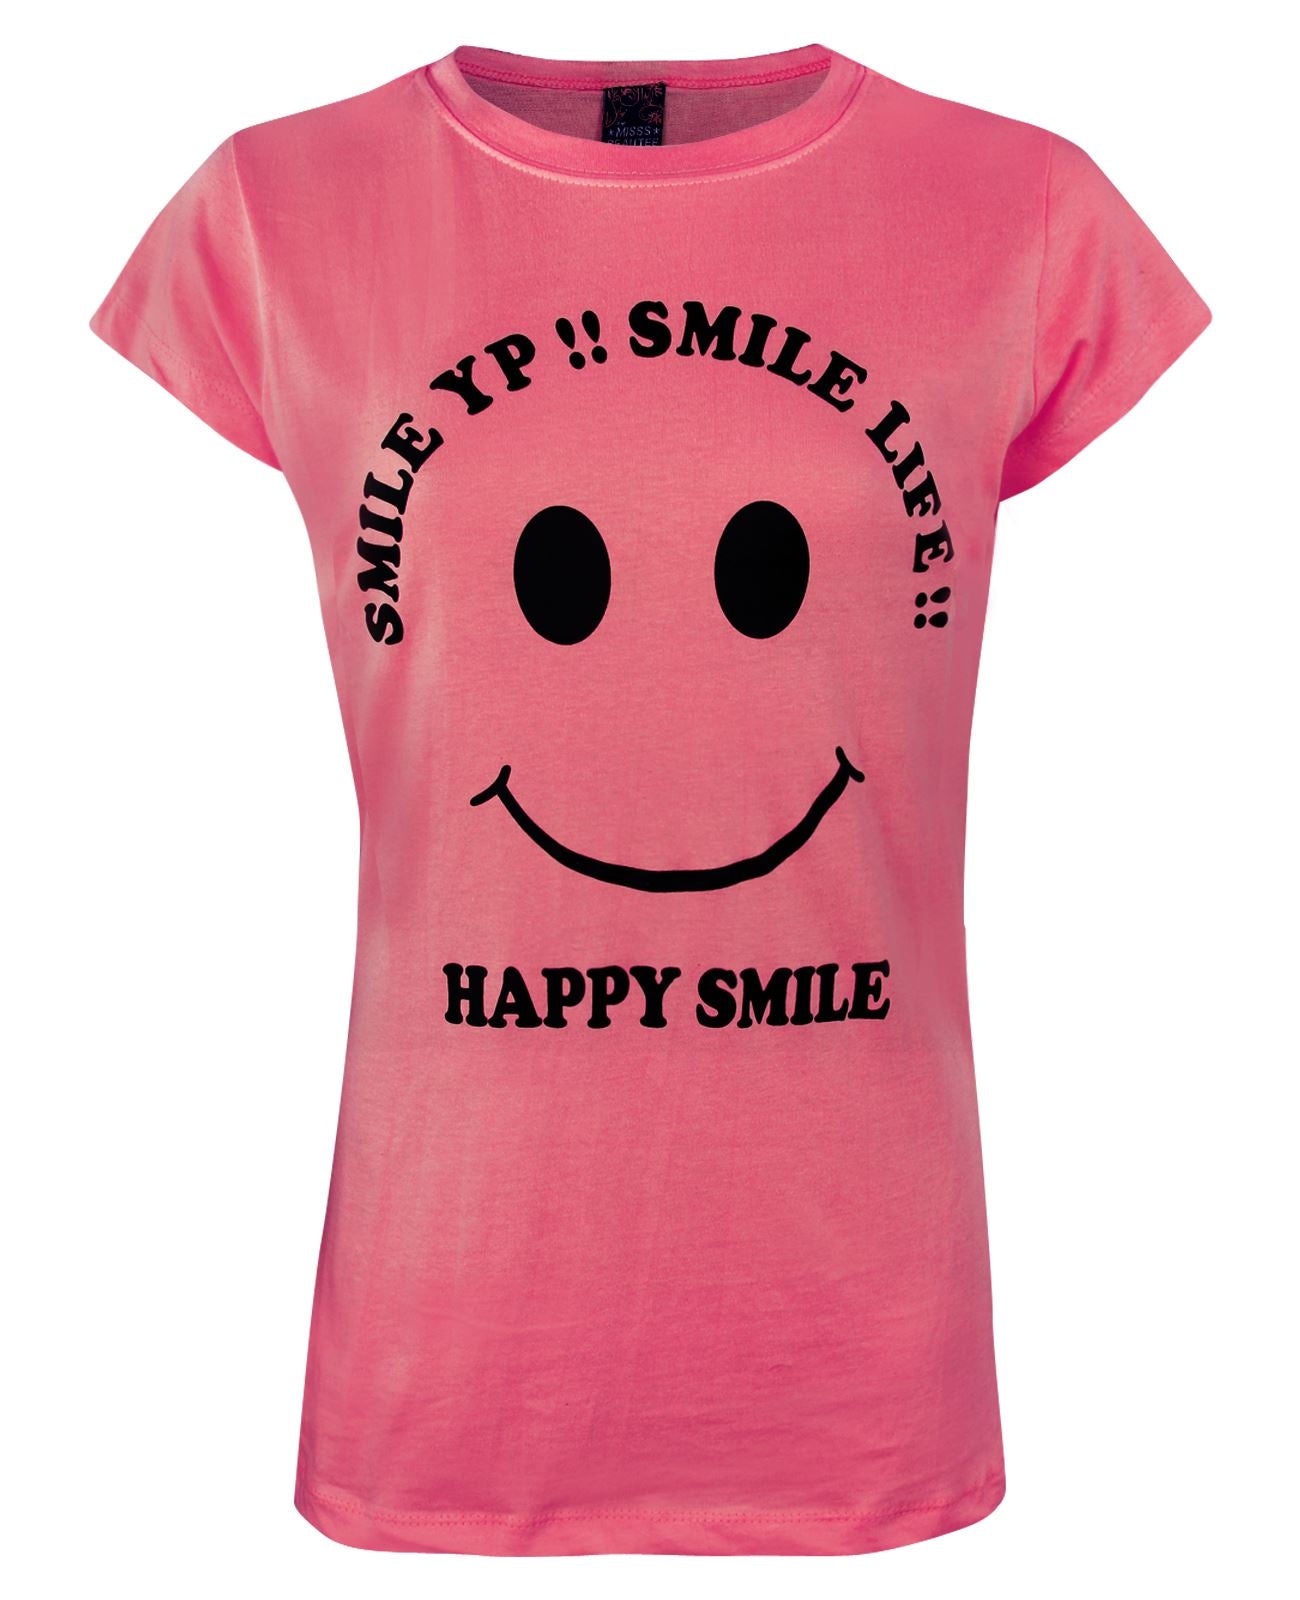 Rose Pink / 6-12 HAPPY SMILE Round Neck Top T-Shirt The Orange Tags